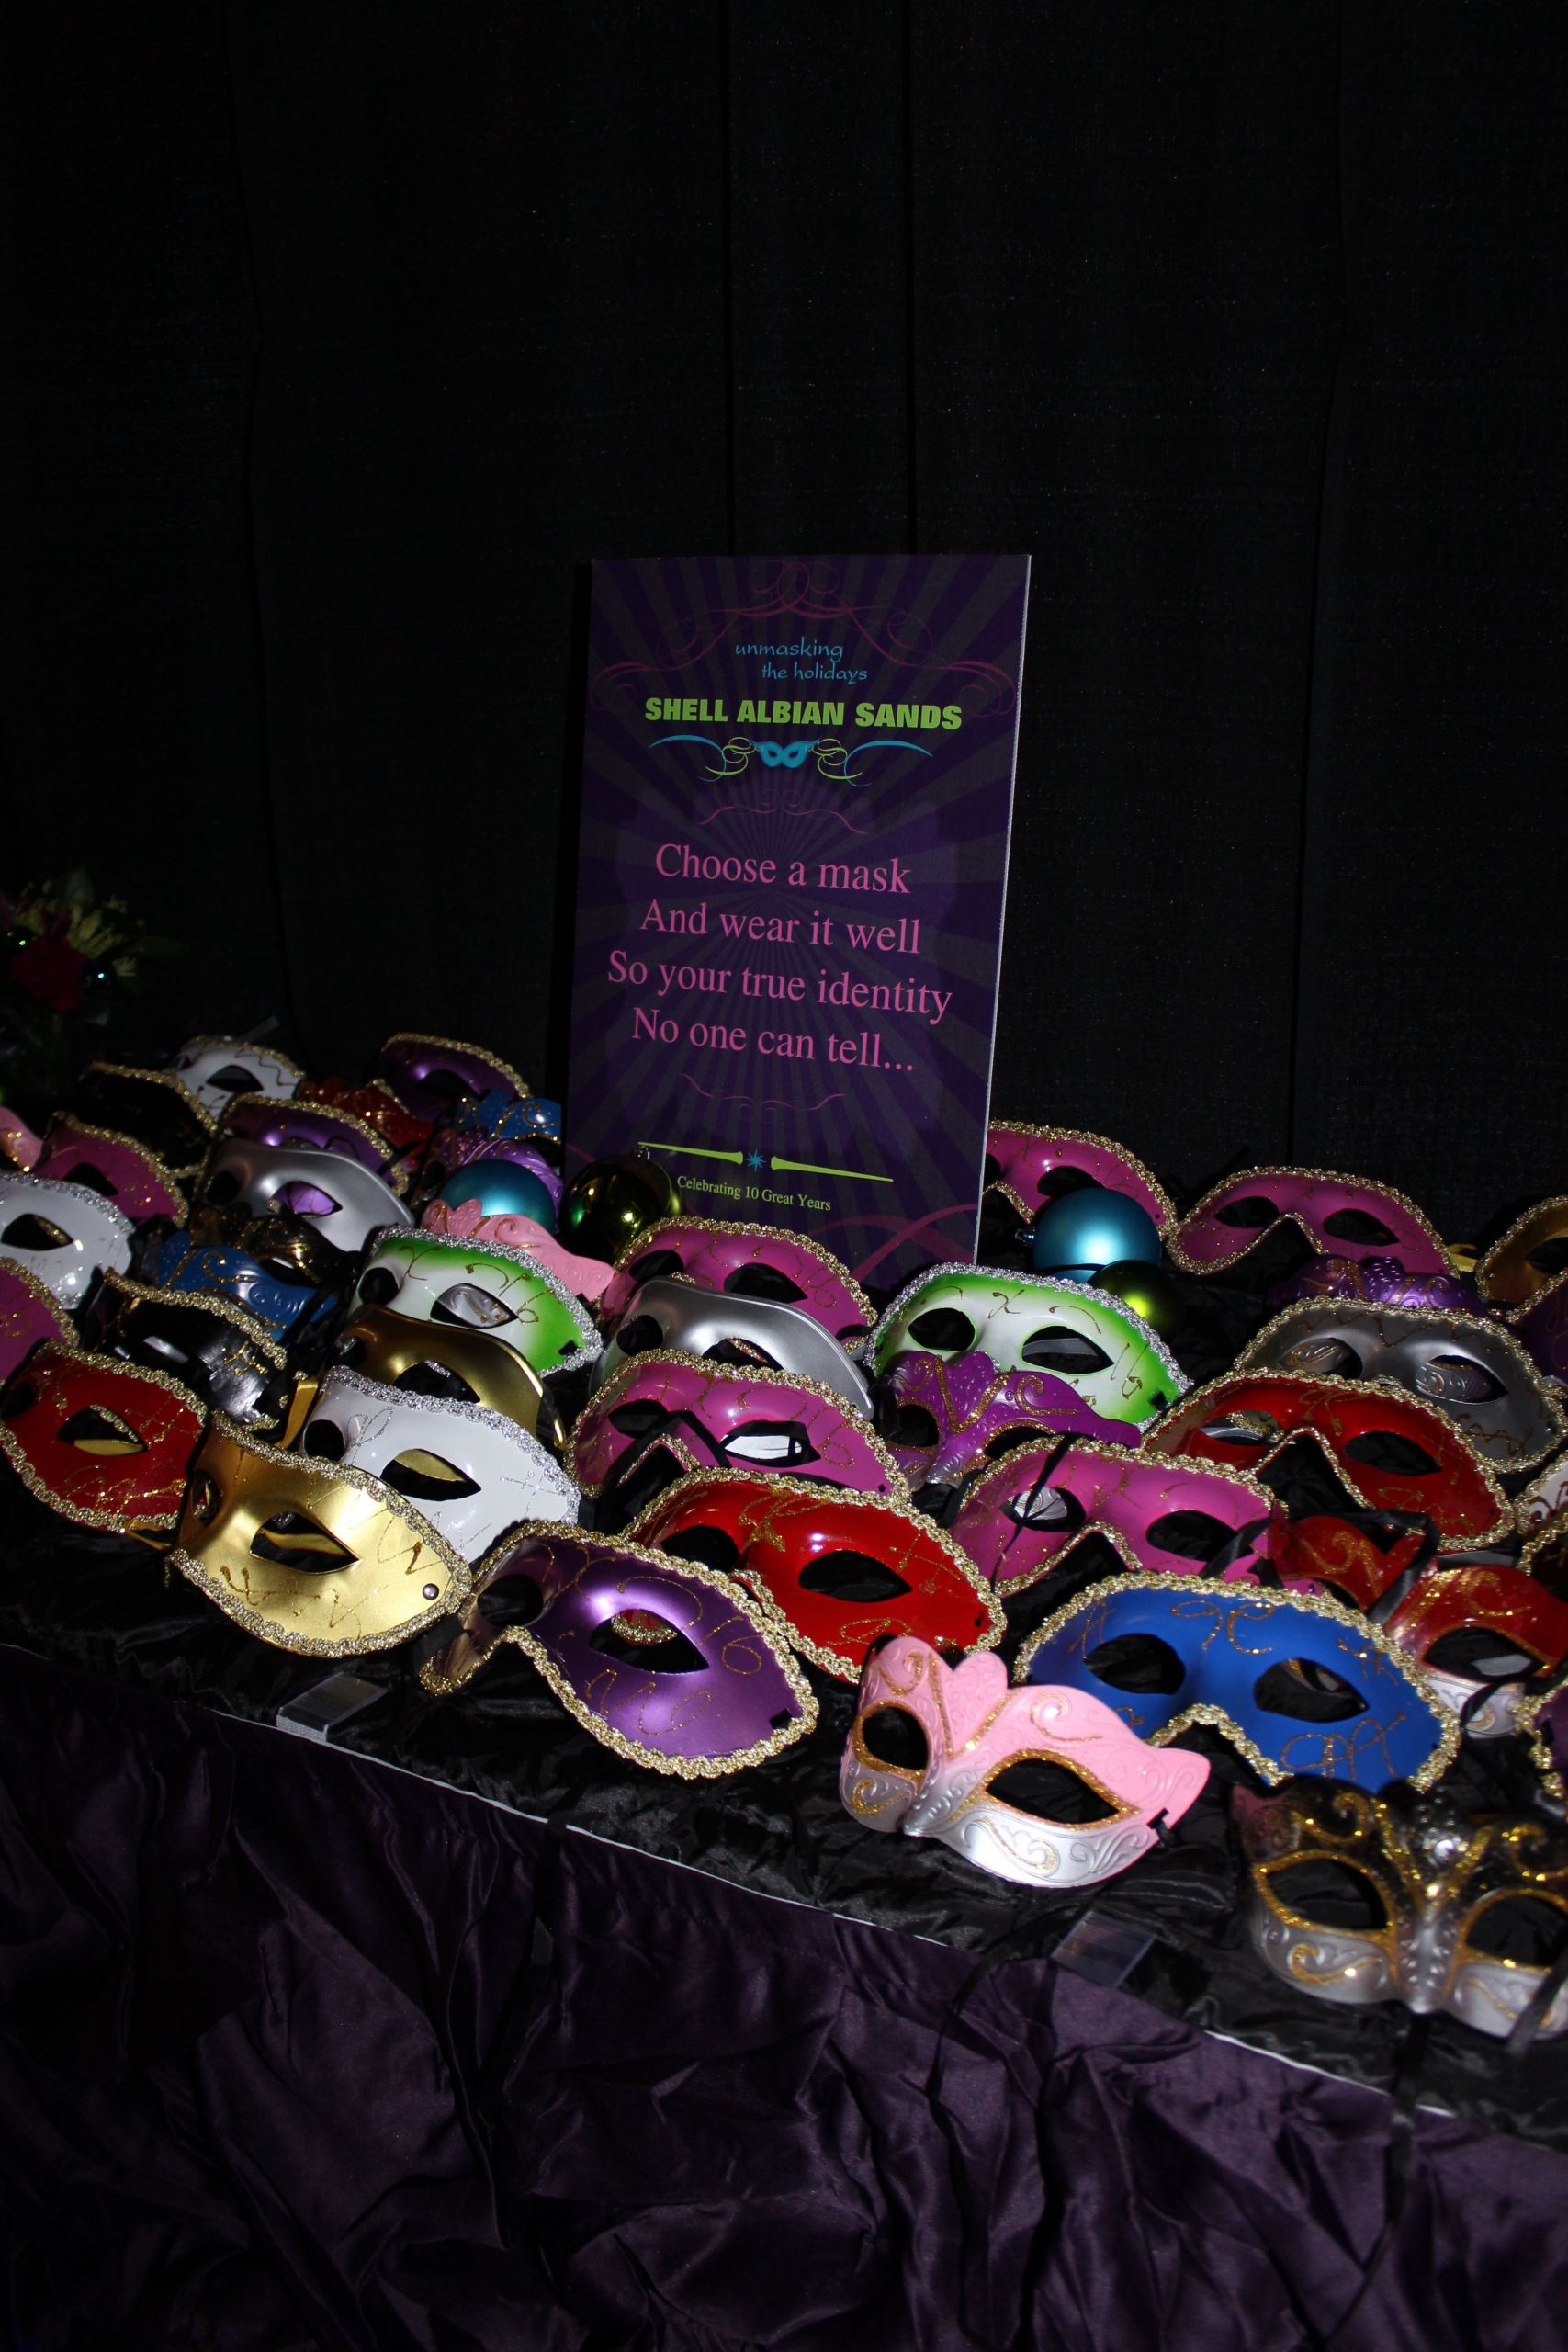 Halloween Masquerade Party Ideas
 A table of masks was set for guests to choose their